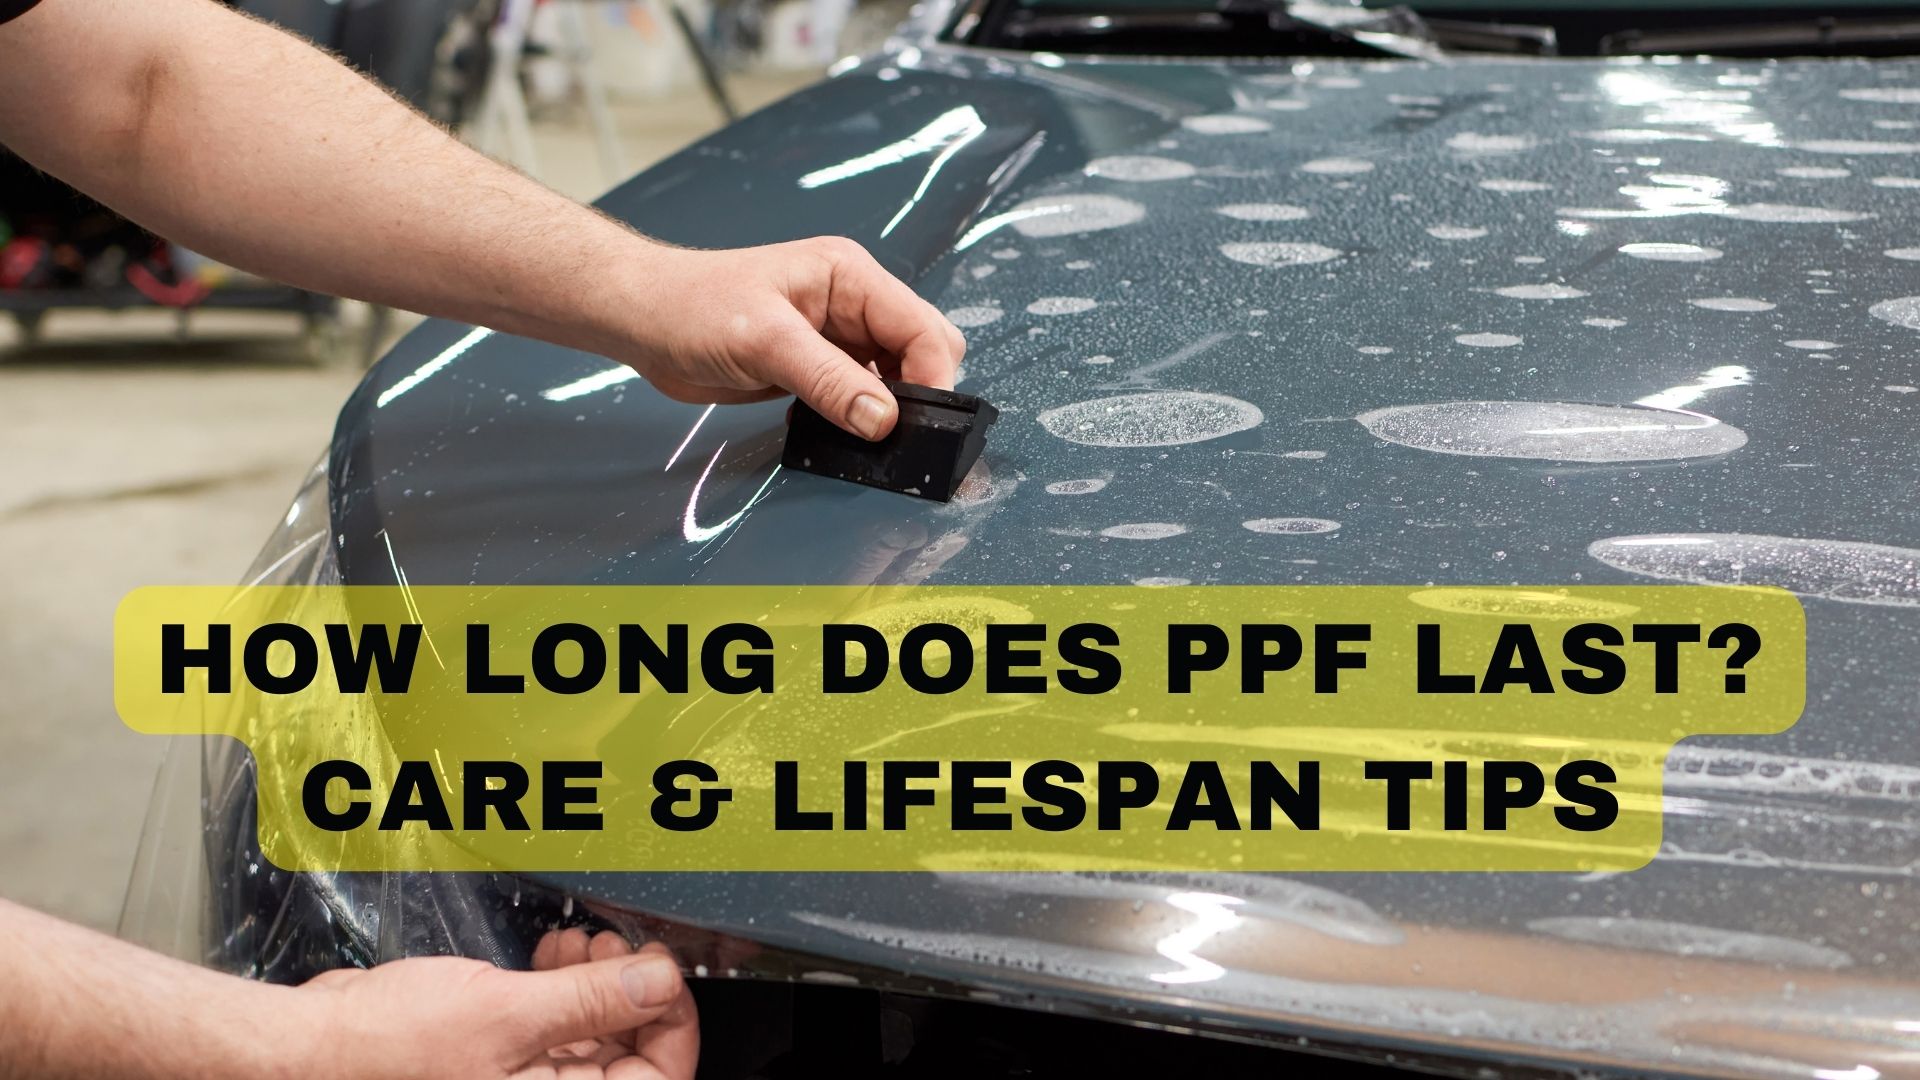 How Long Does PPF Last? Care & Lifespan Tips